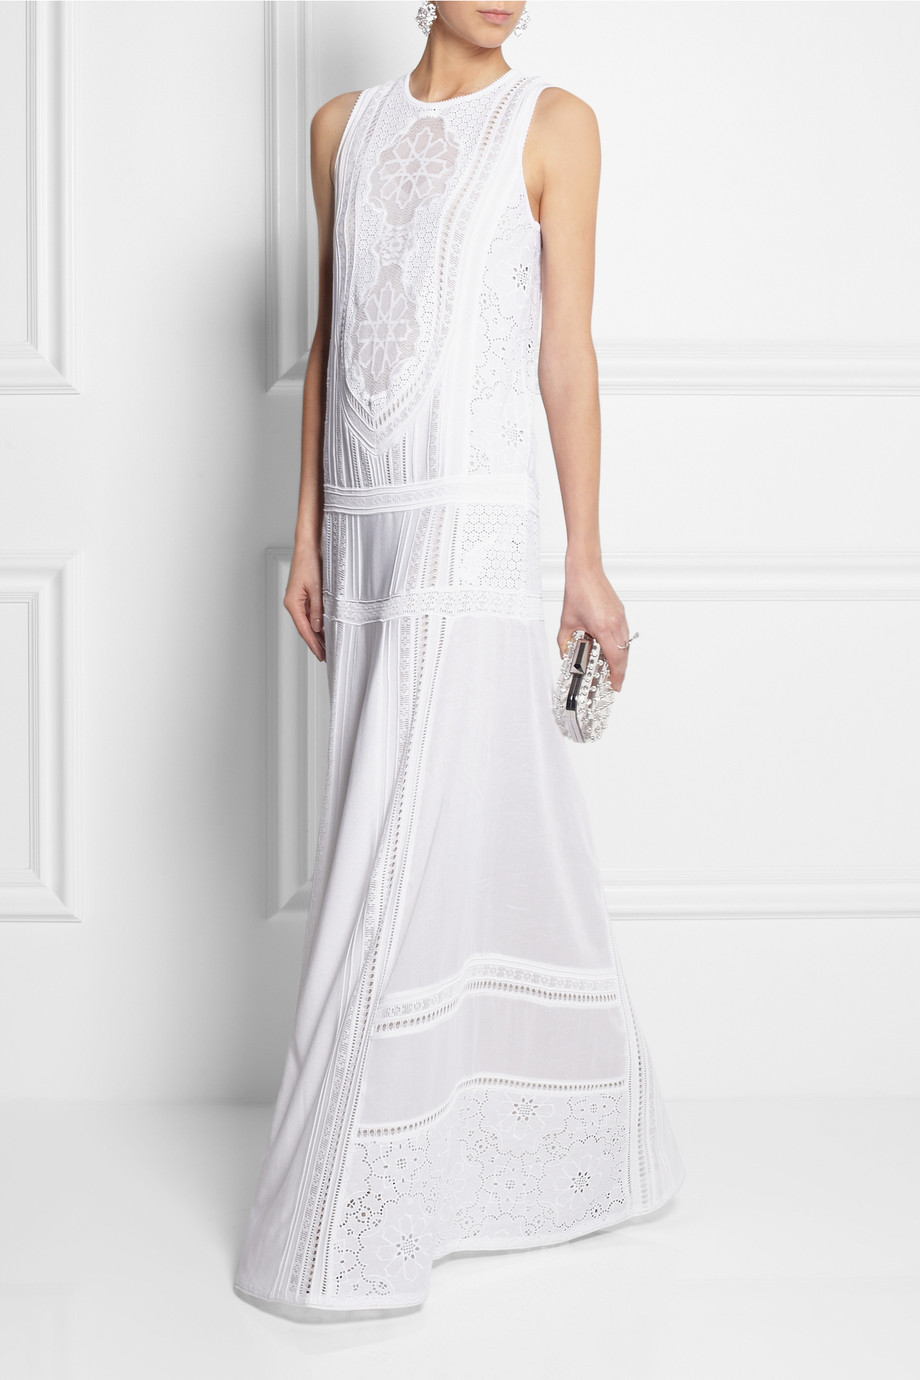 Roberto Cavalli Cotton and Crocheted Lace Maxi Dress in White - Lyst